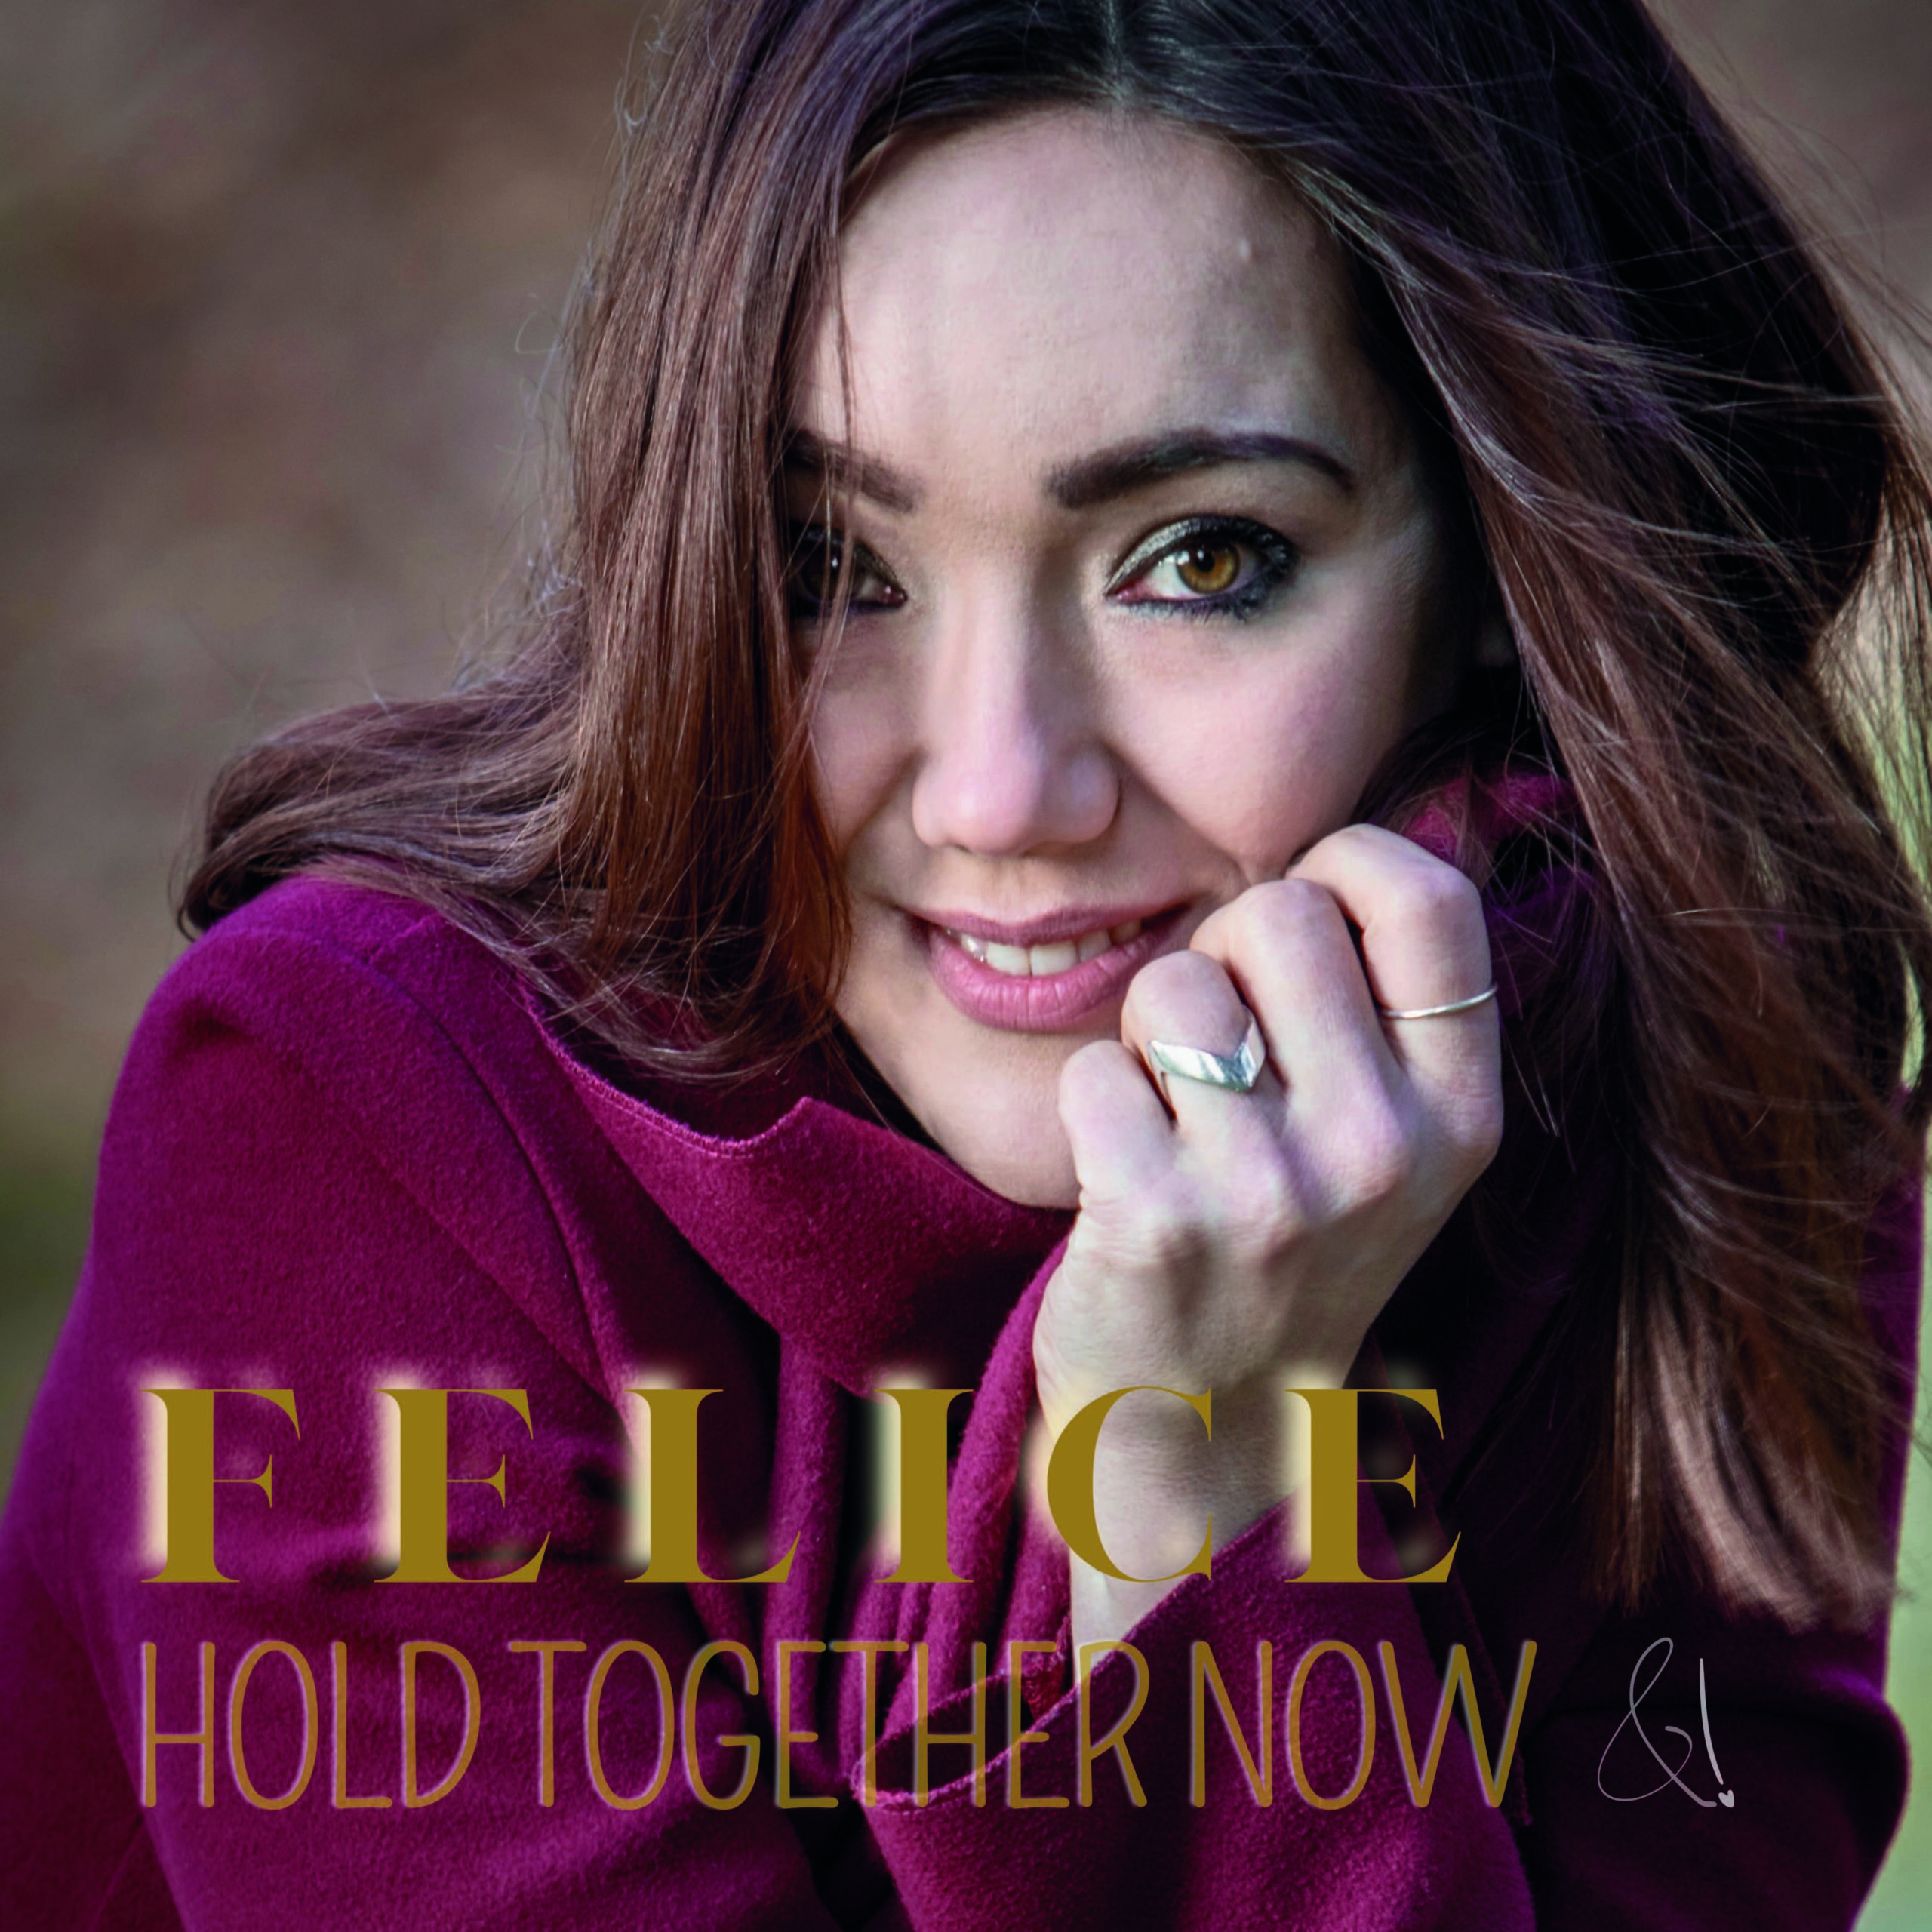 Felice – Hold Together Now